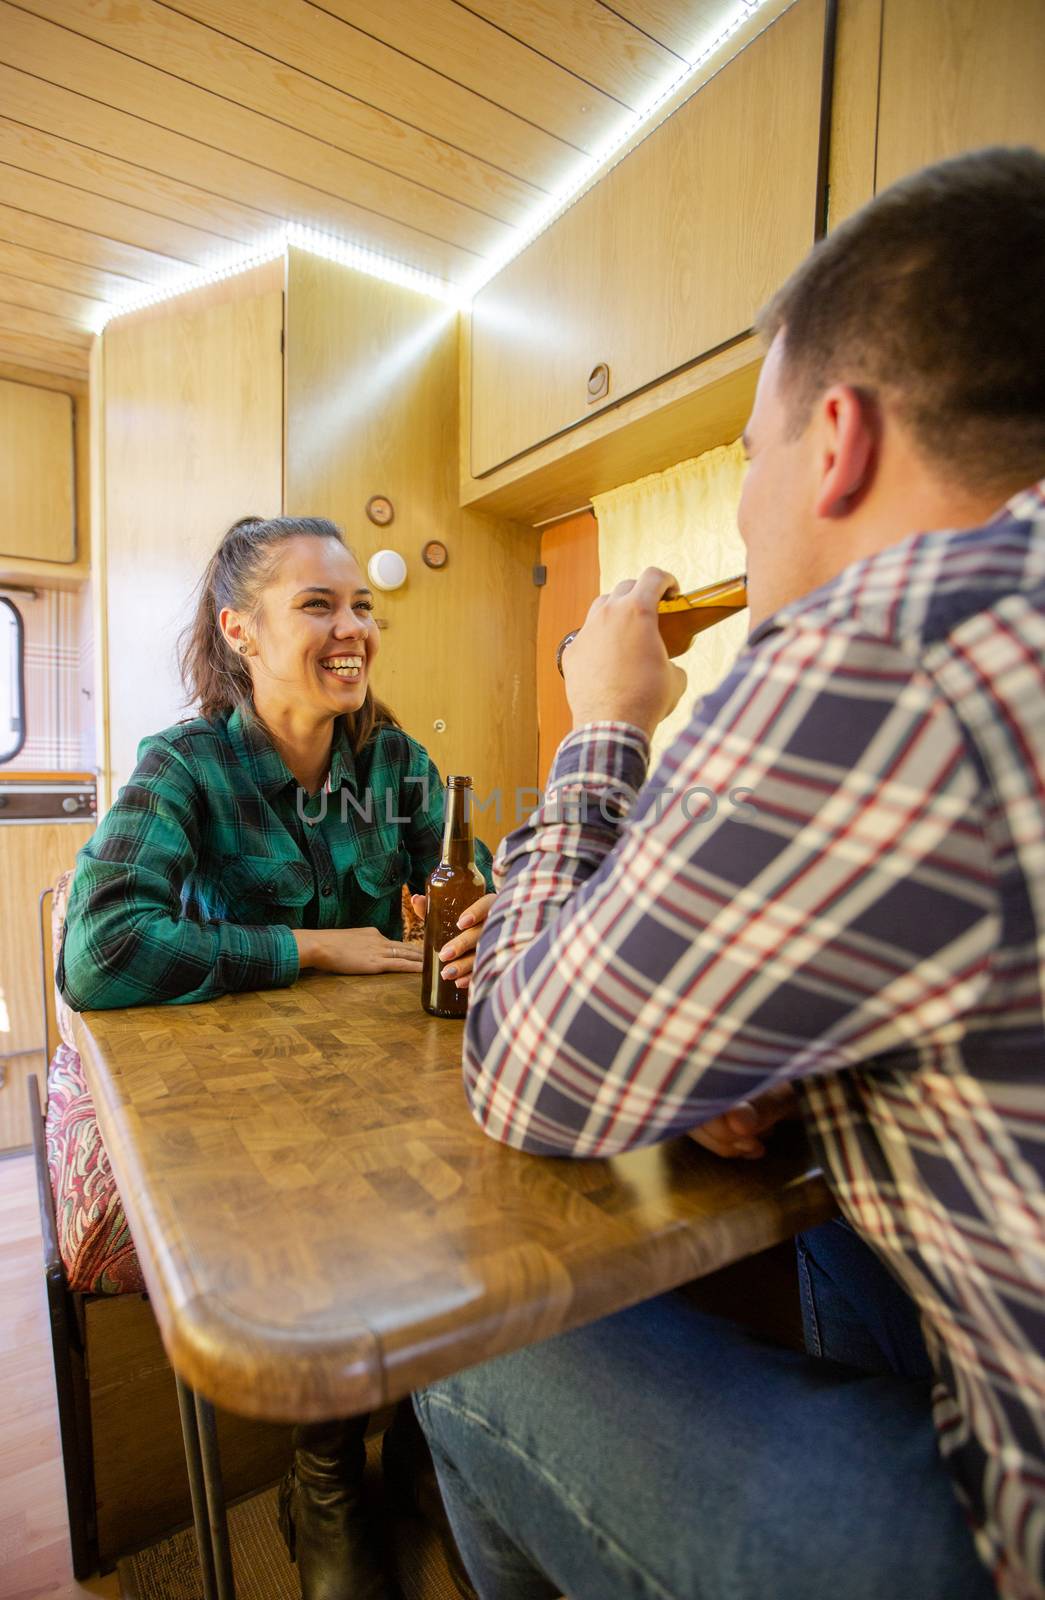 Loving couple smiling and chatting while drinking beer in the caravan. Vacation together